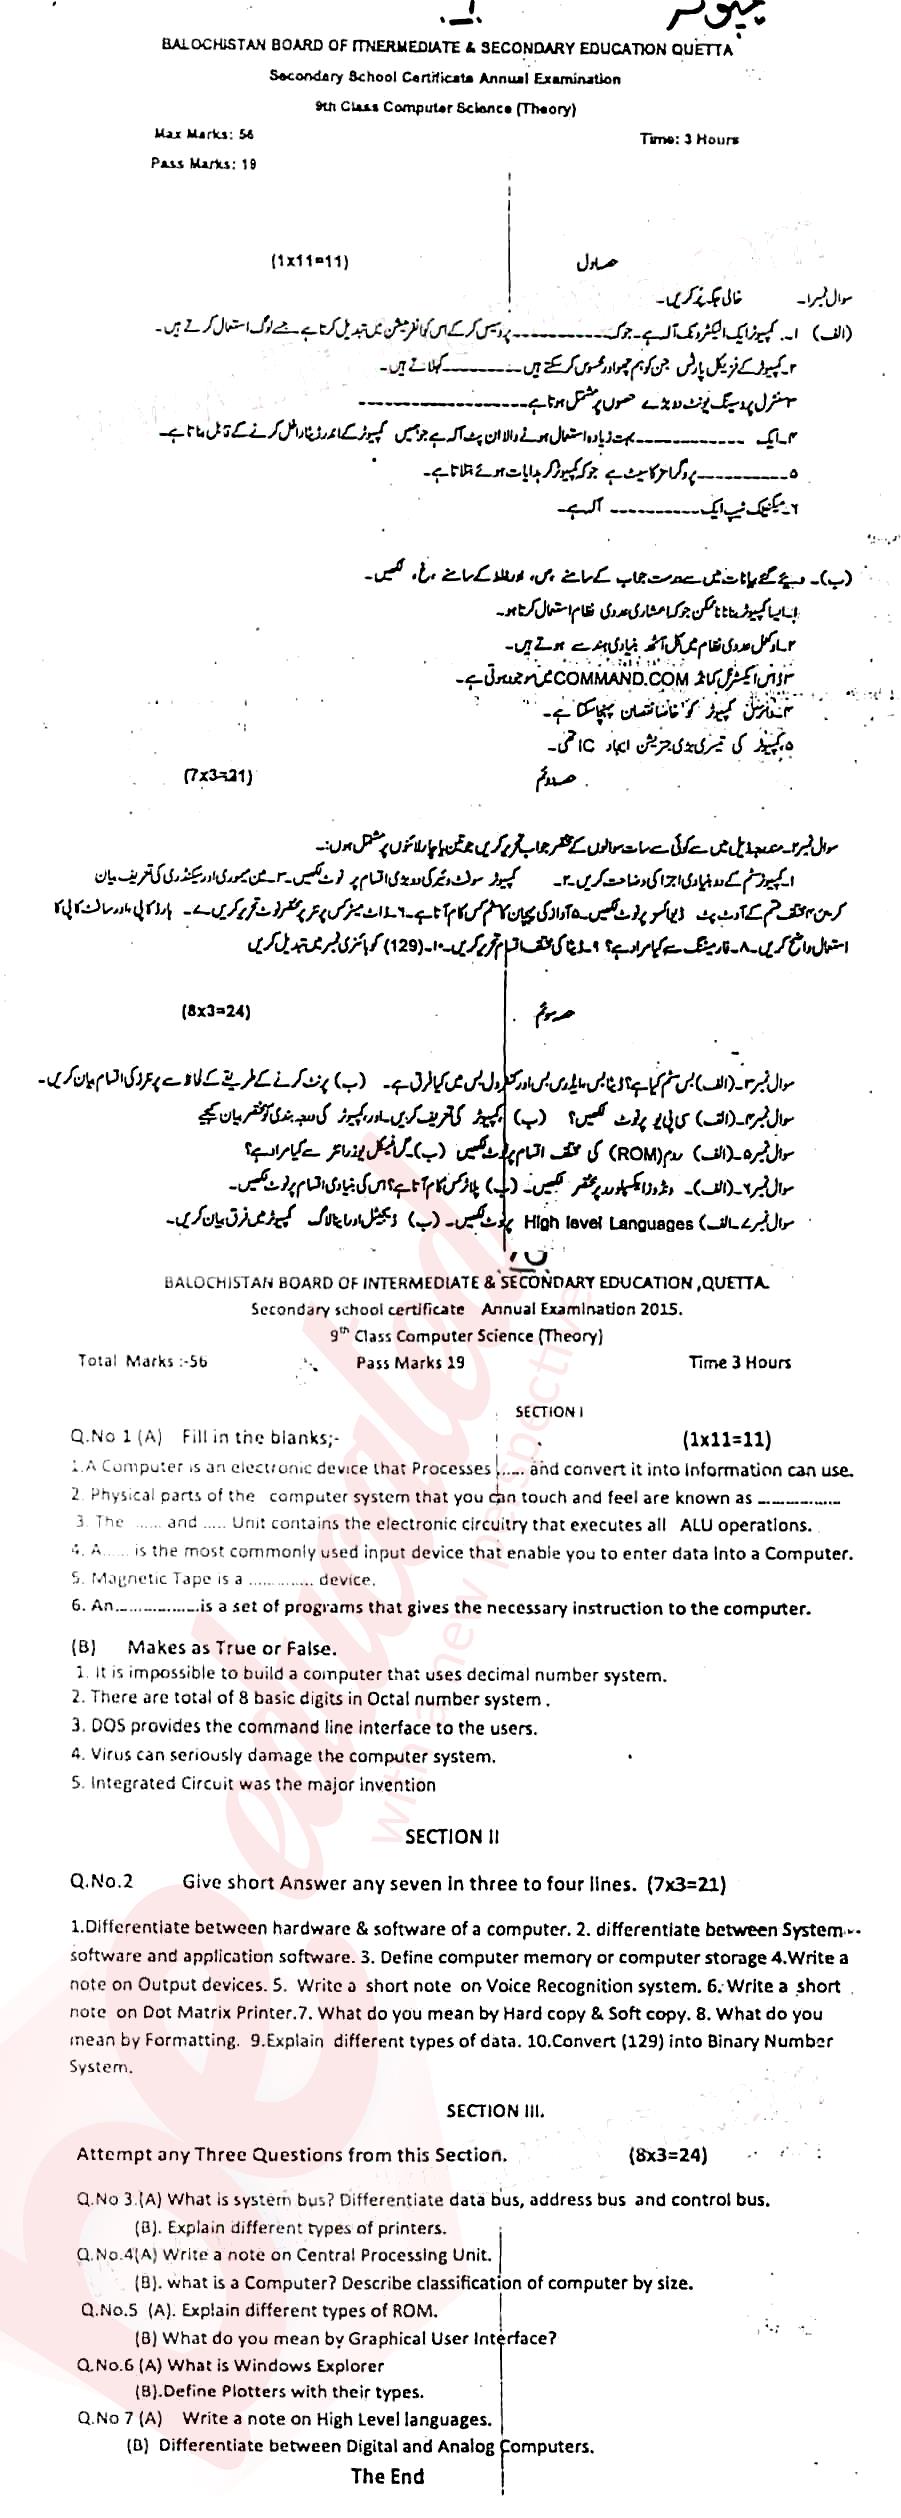 Computer Science 9th class Past Paper Group 1 BISE Quetta 2015